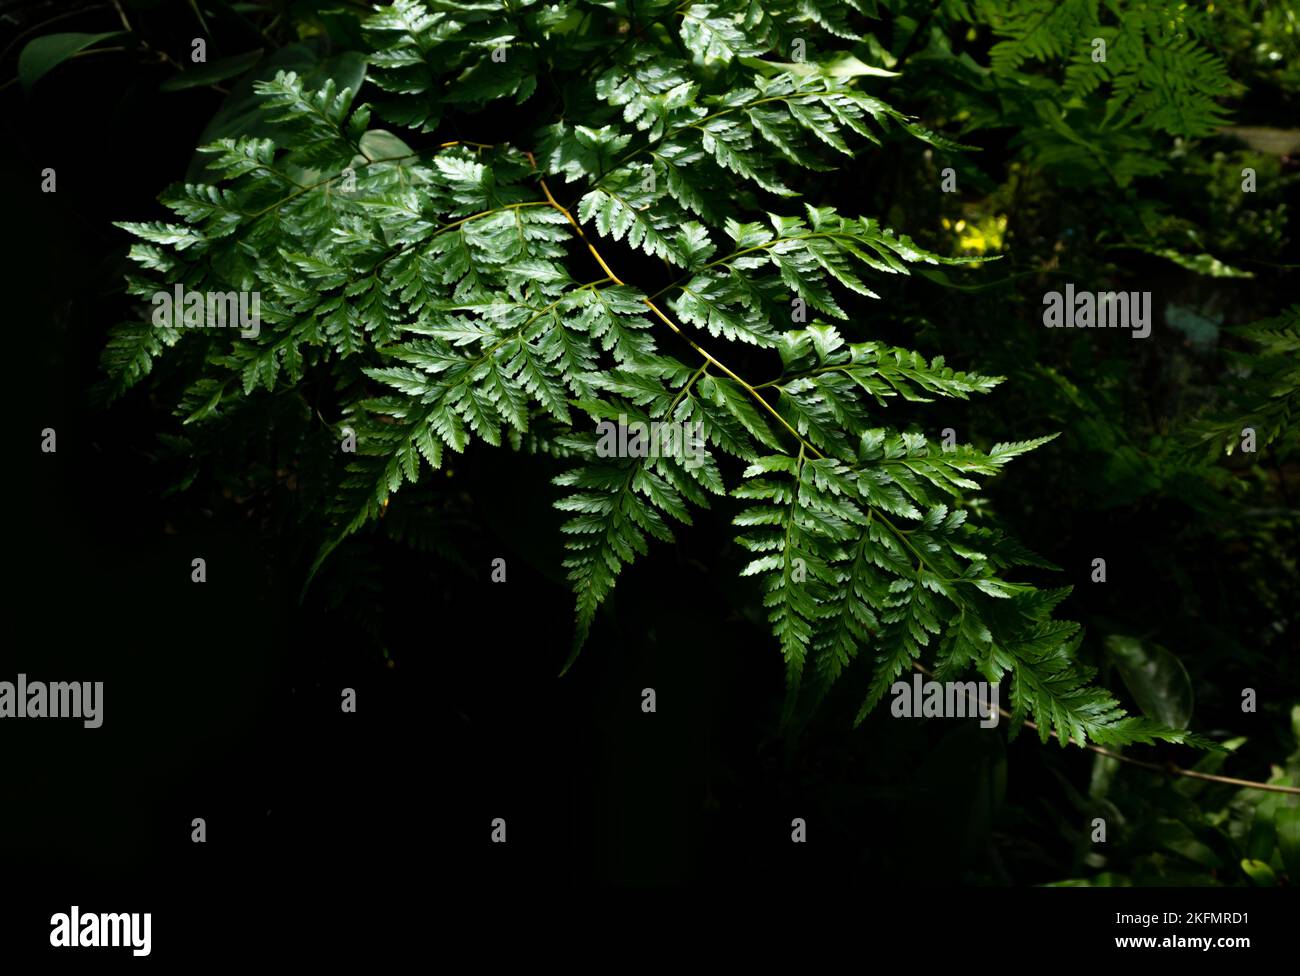 Leaves of Davallia solida Fern as green nature background Stock Photo